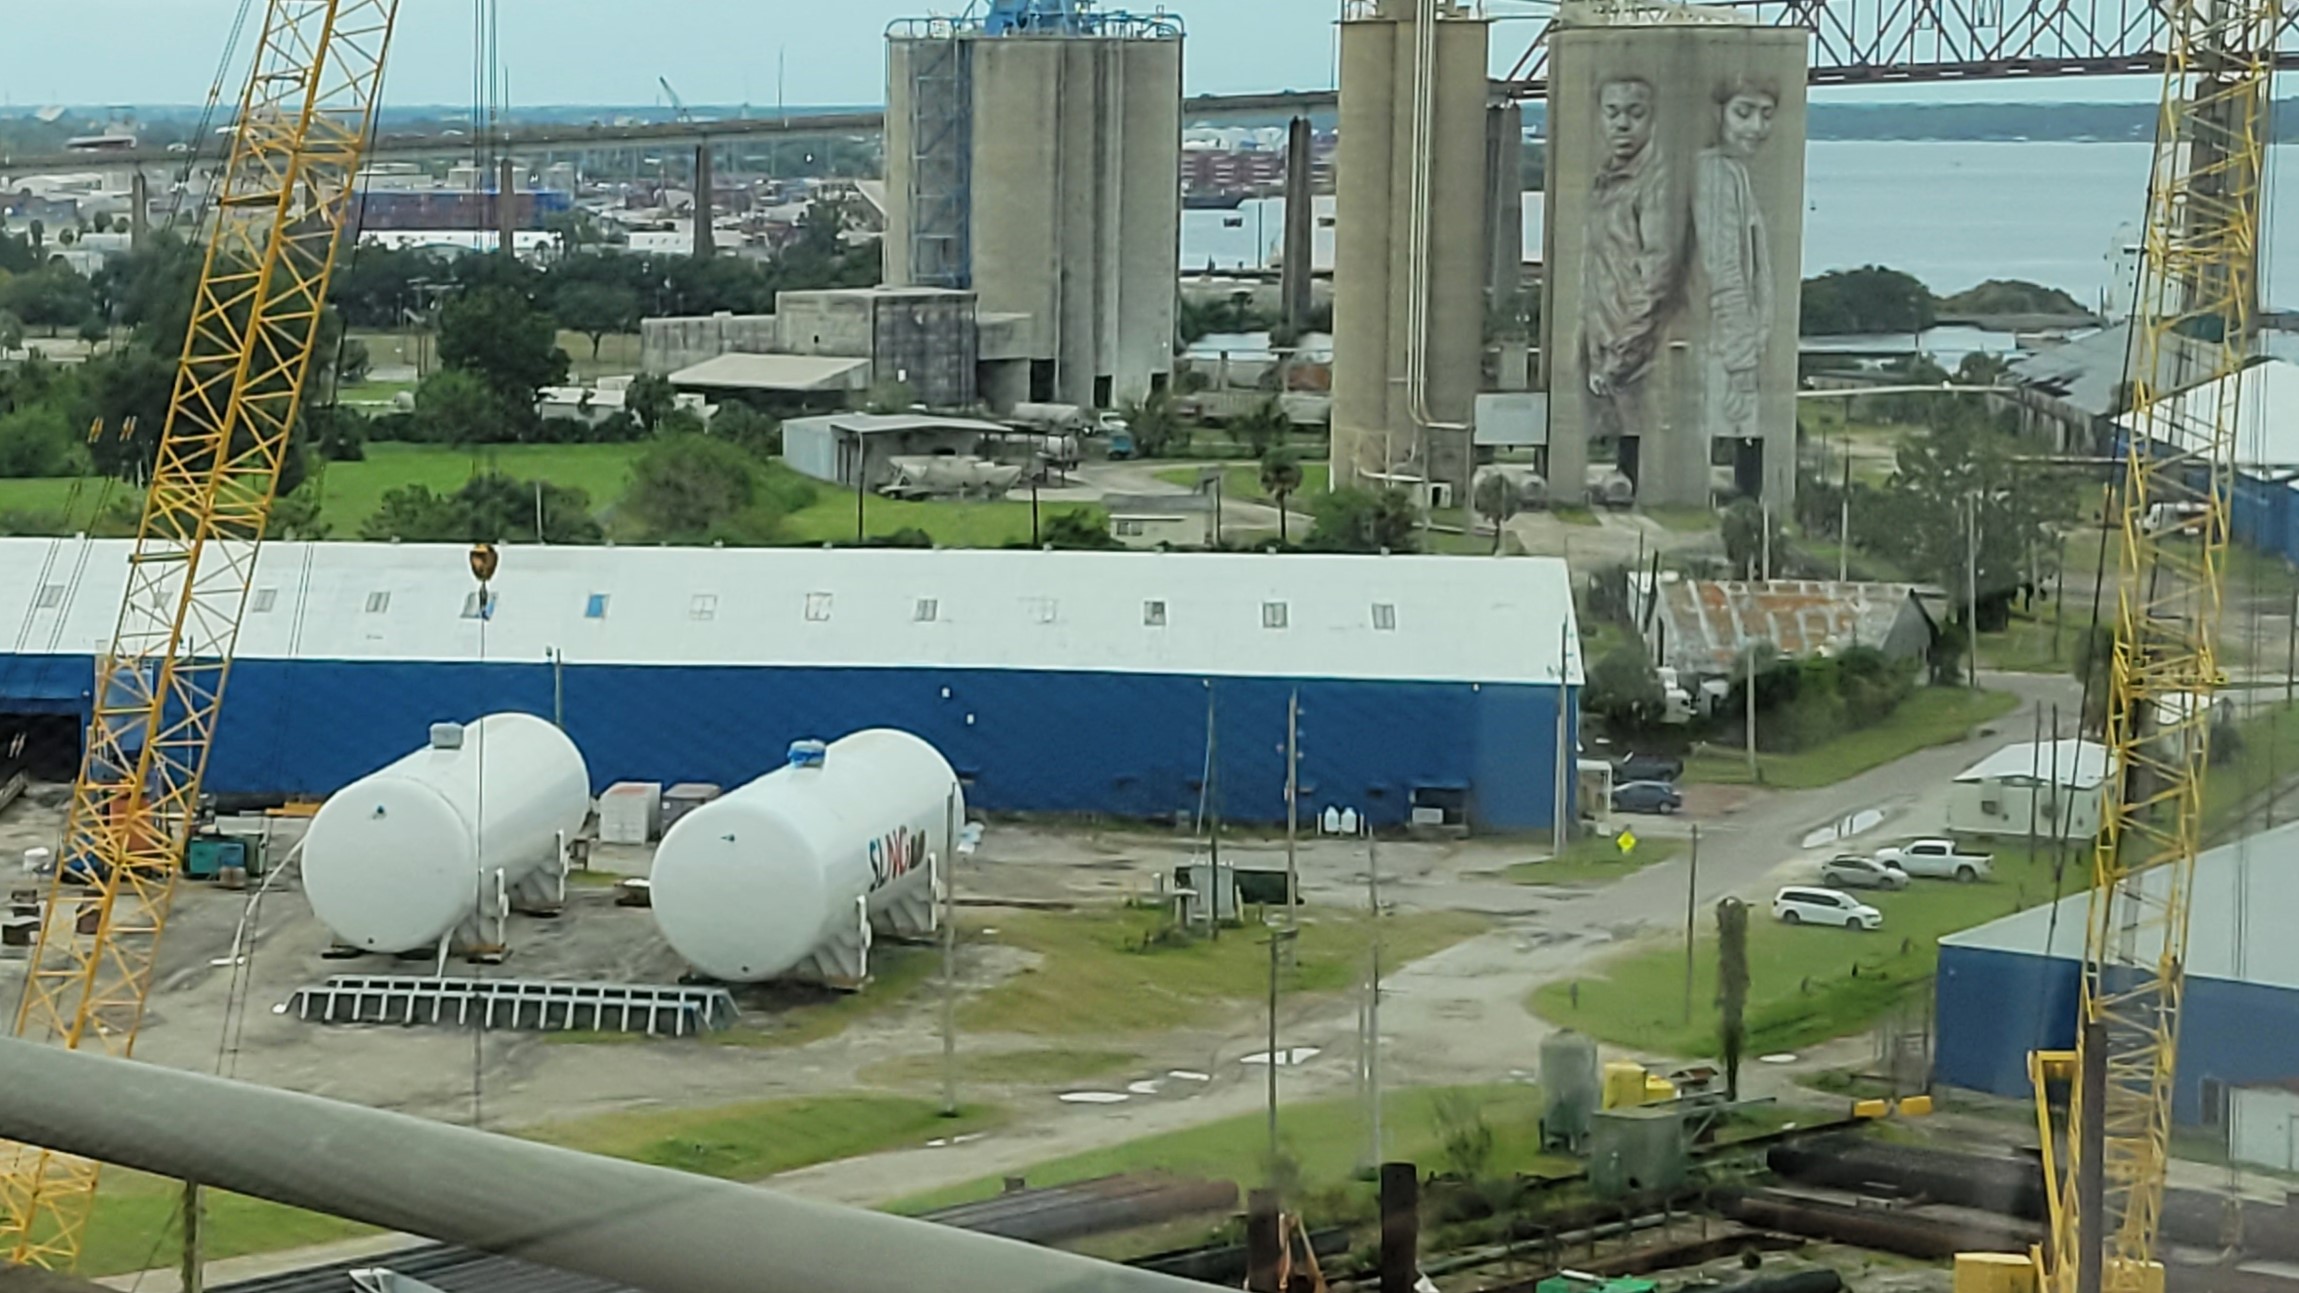 Featured image for “#AskJAXTDY | What are those natural gas tanks doing at Commodore Point?”